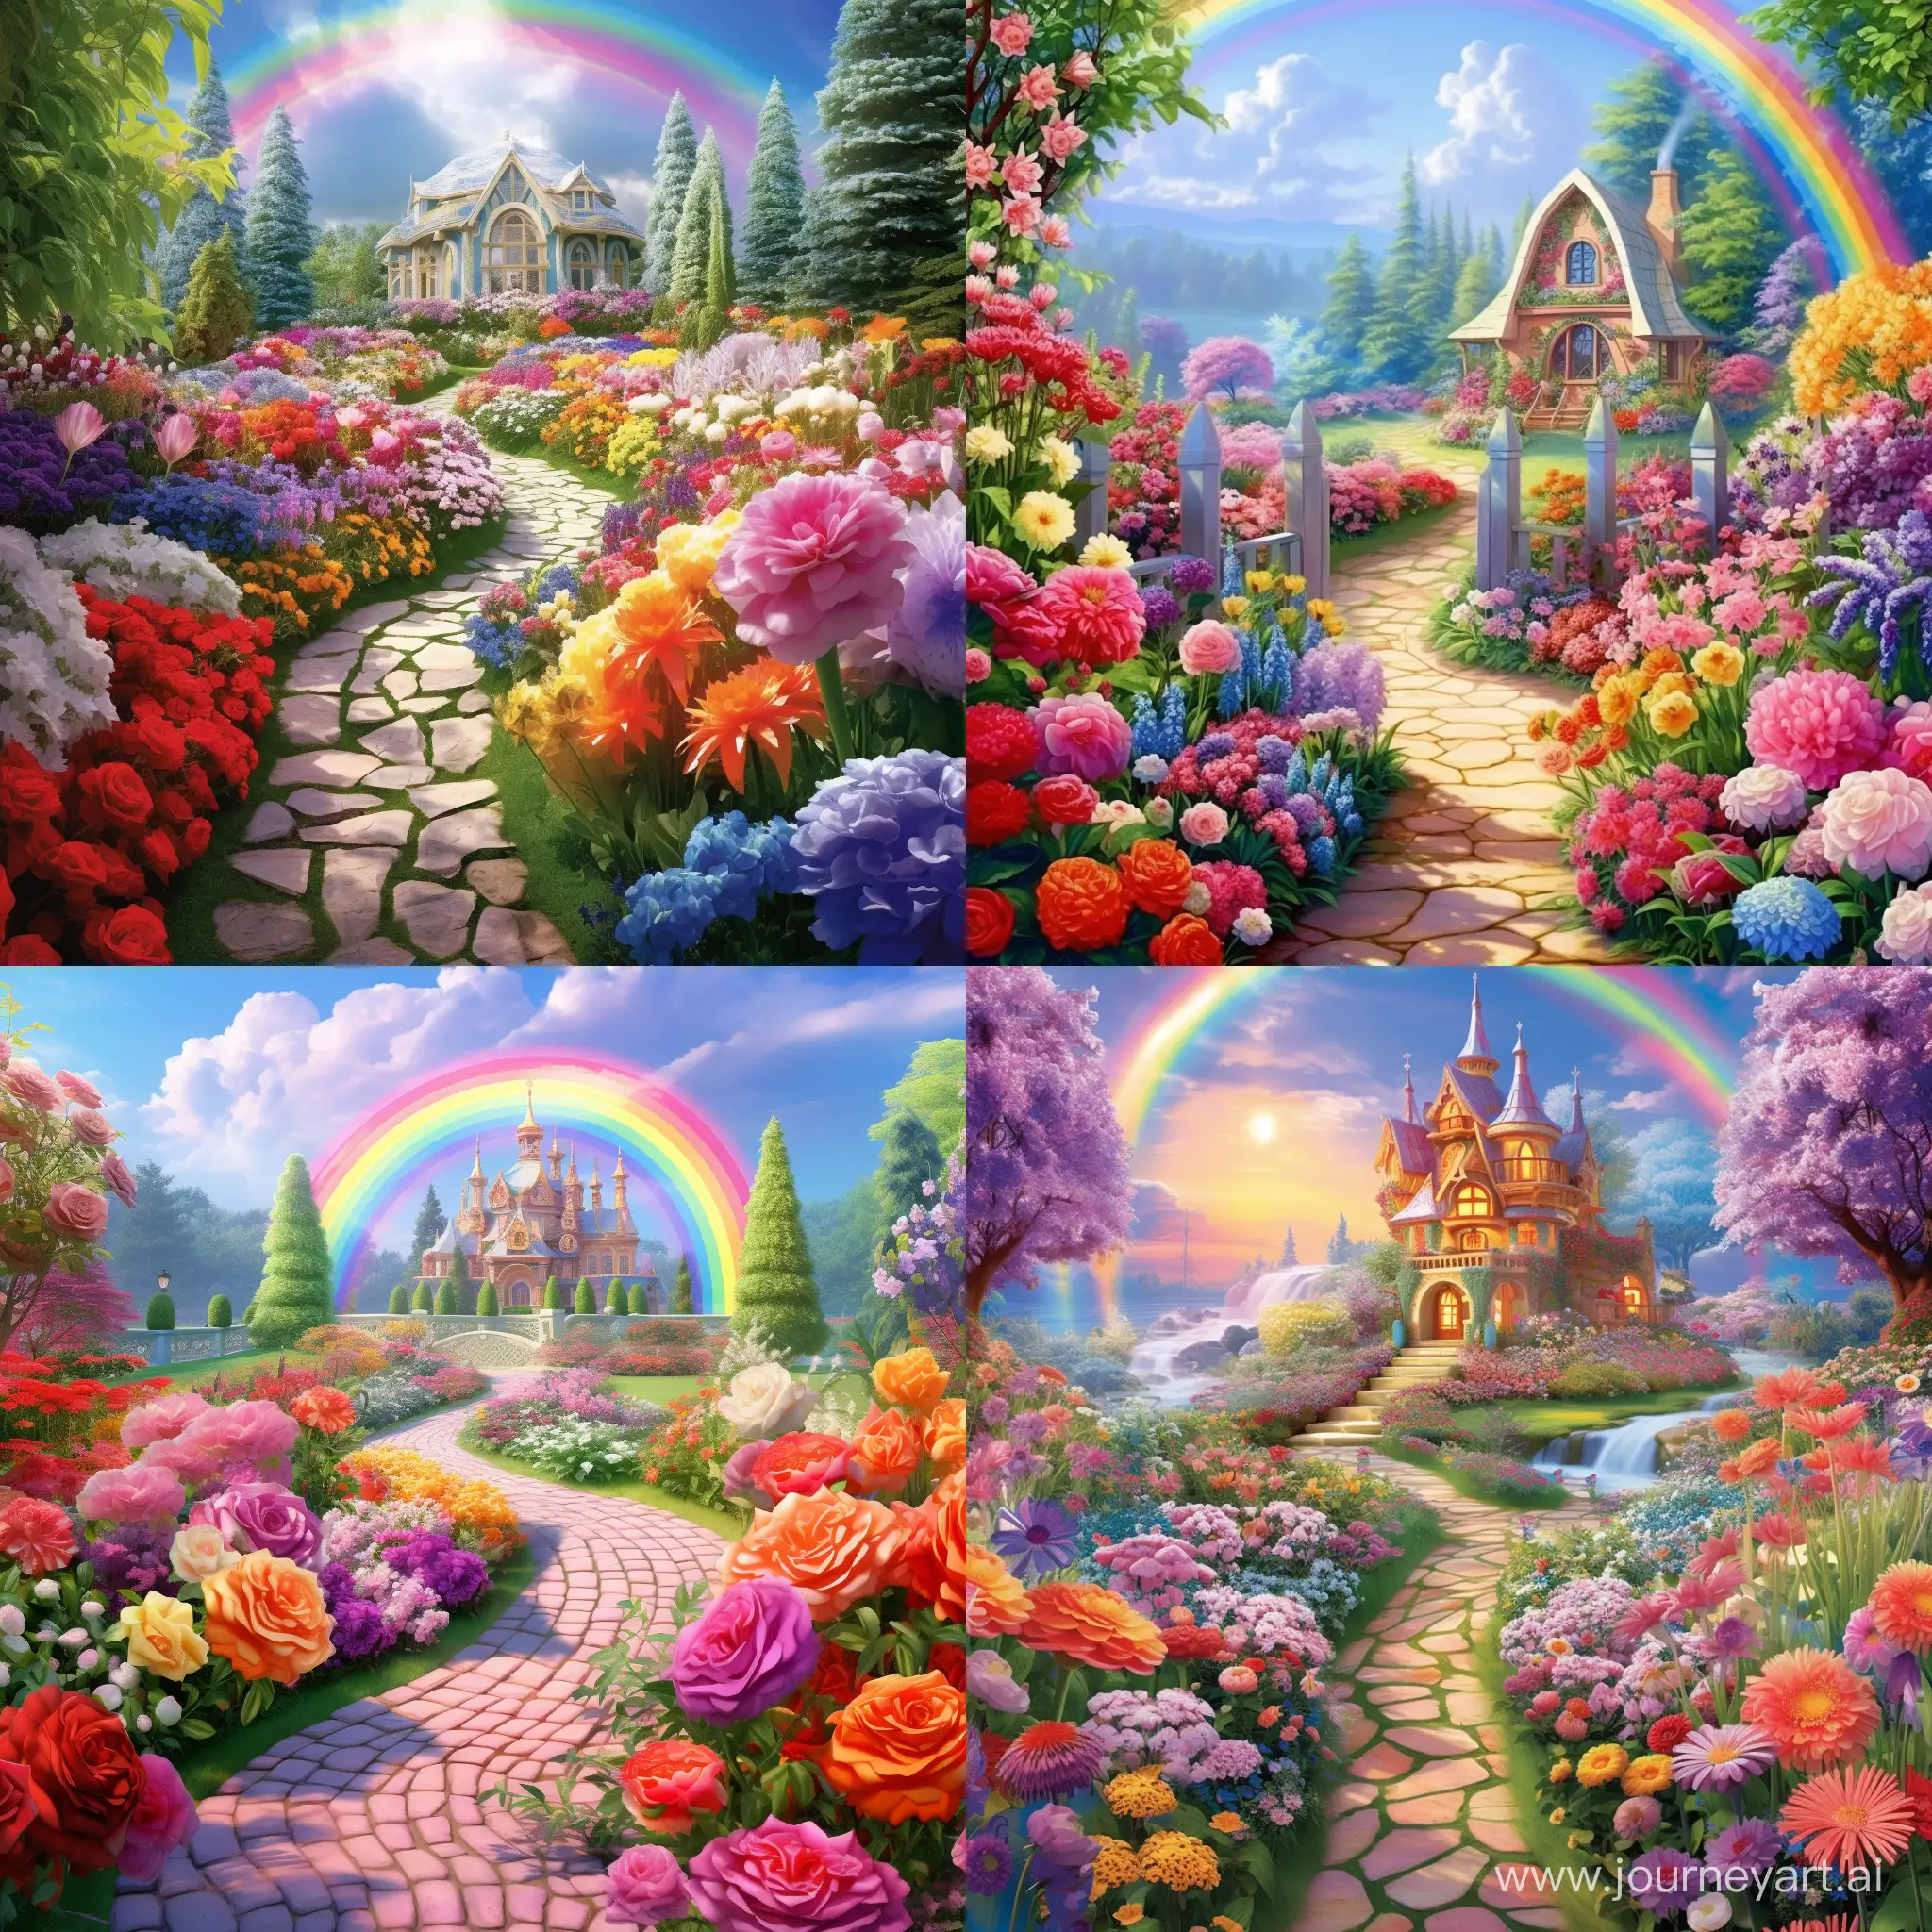 A magical garden where flowers bloom in the brightest shades of the rainbow.  Here colorful colors ring, the aromas of flowers fill the air and create a unique atmosphere of magic and beauty.  Roses of purple passion, lilies of snow-white tenderness, hyacinths of blue skies and tulips of bright joy - they all create a picture that will be remembered forever.  The magic of nature is revealed here in full glory, and each flower seems to tell its own amazing story of beauty.